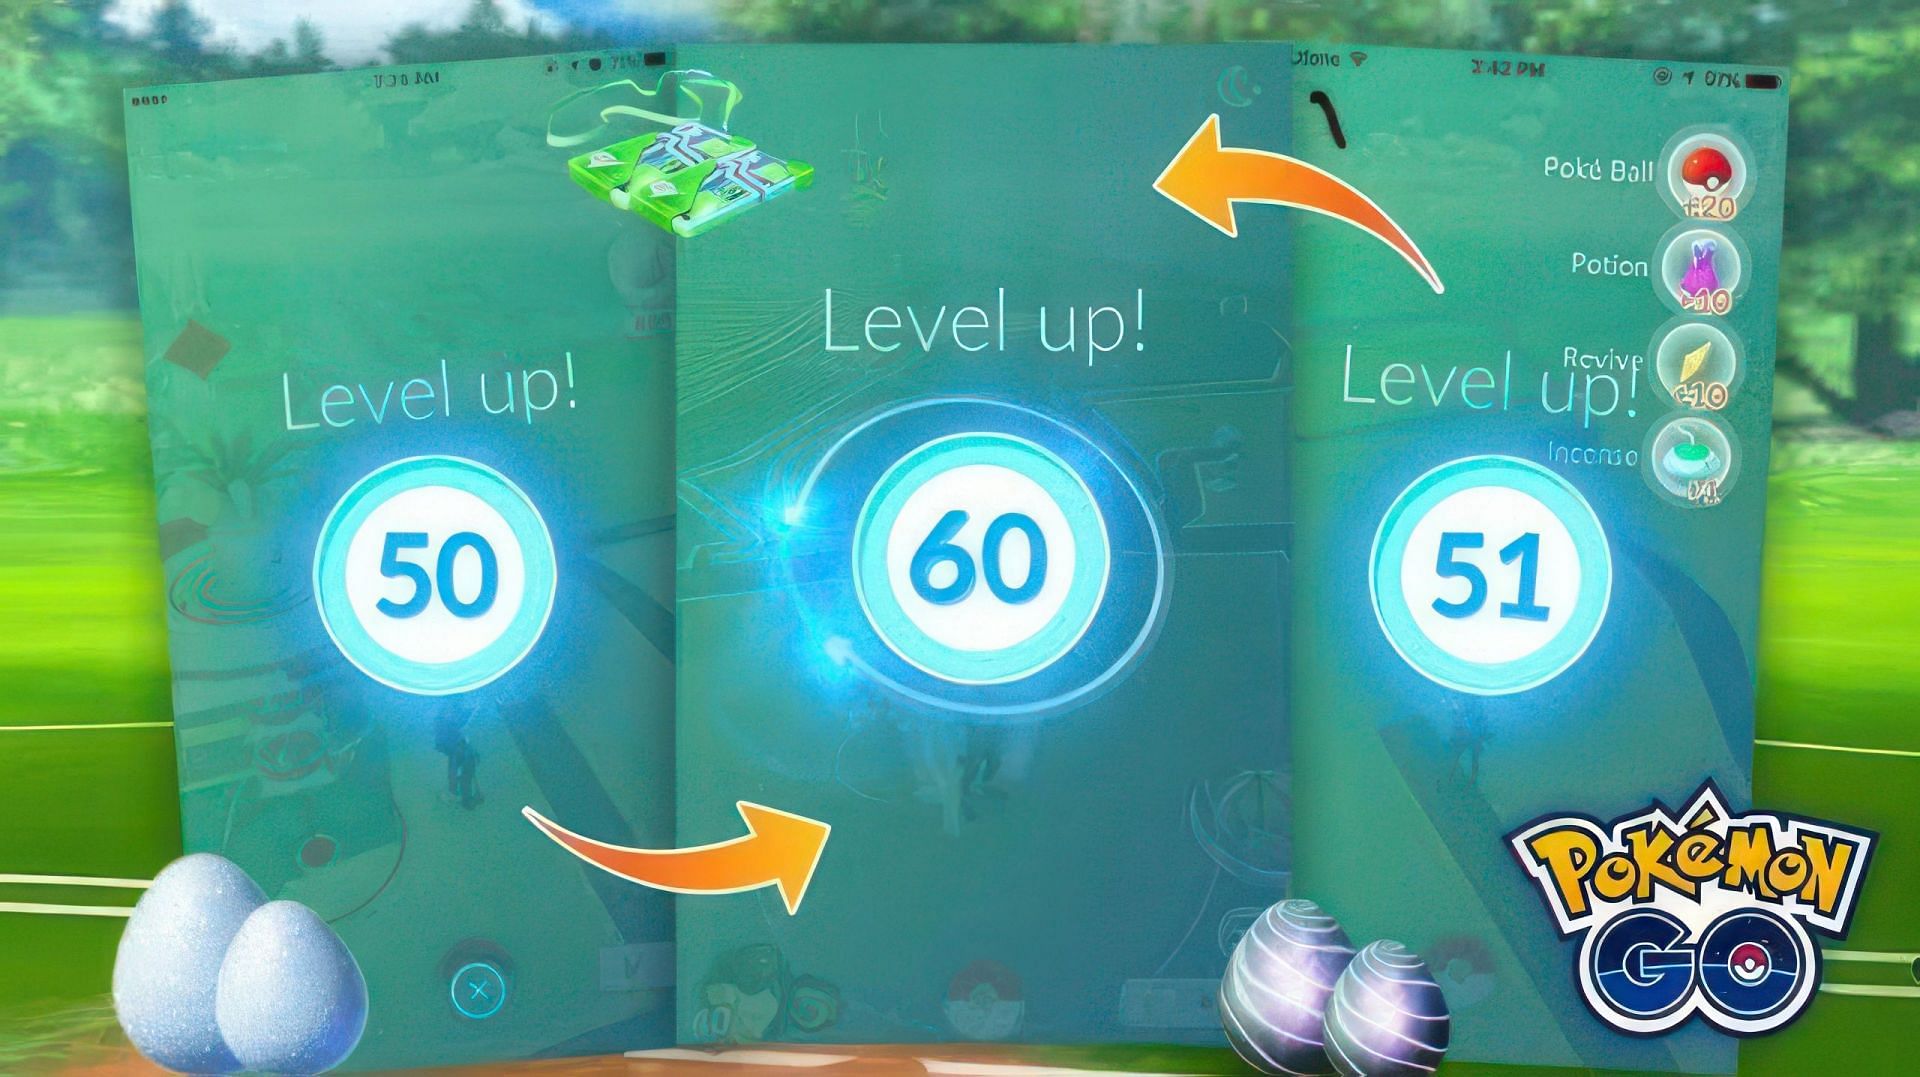 Pokemon GO: Max Level Cap 40 Reached By Player - The Tech Game